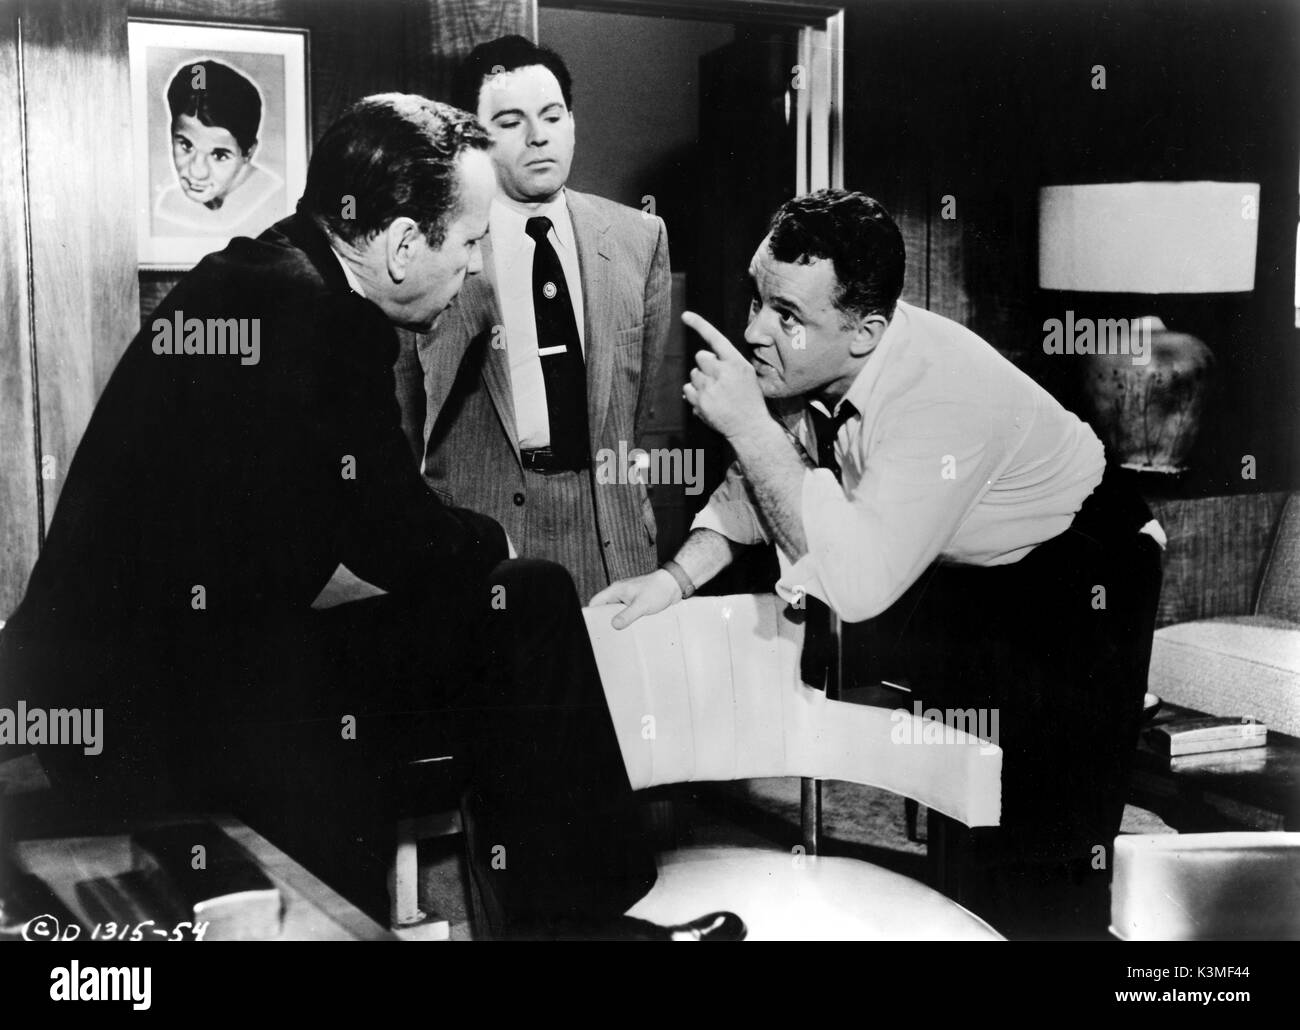 THE HARDER THEY FALL [US 1956] [L-R] HUMPHREY BOGART, NEHEMIAH PERSOFF, ROD STEIGER     Date: 1956 Stock Photo